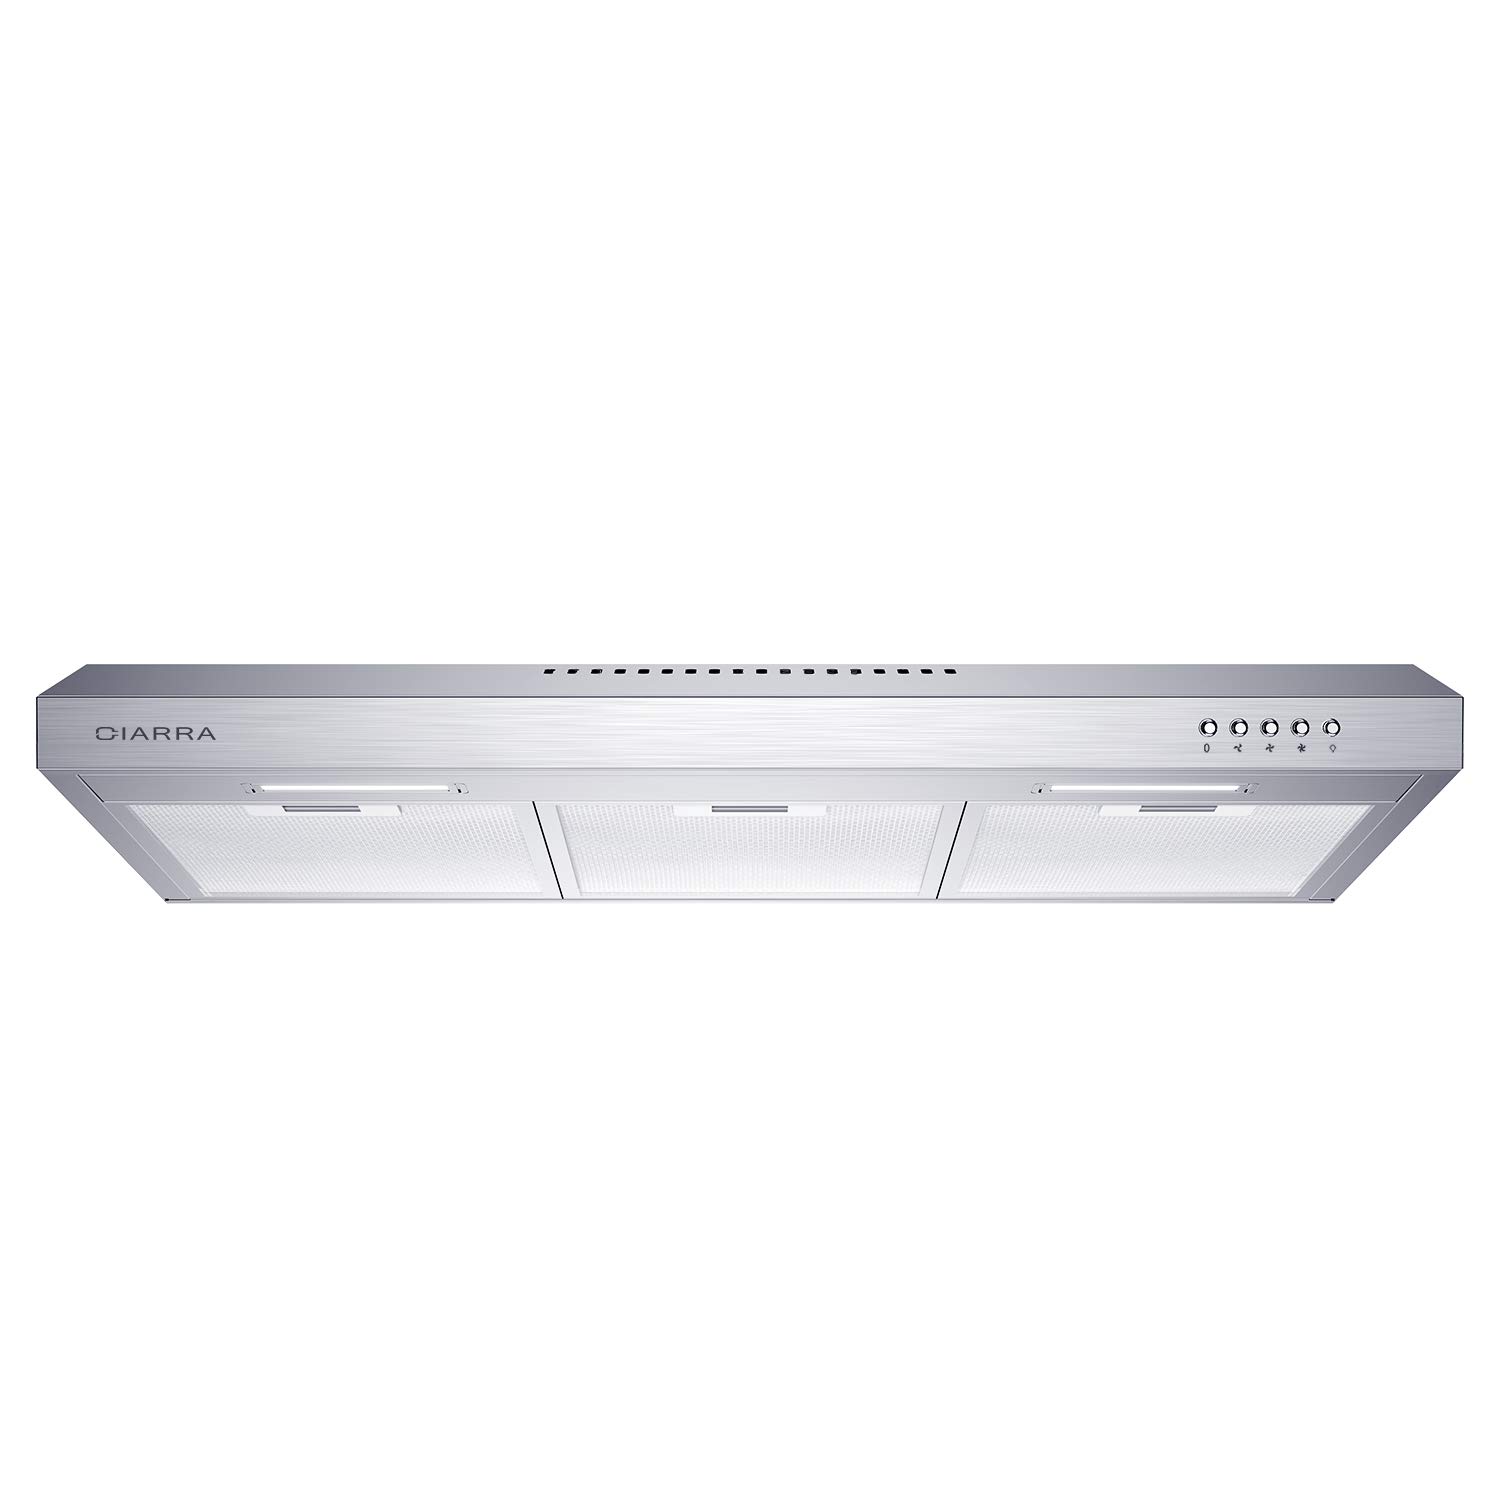 CIARRA Ductless Range Hood 30 inch Under Cabinet Hood Vent for Kitchen Ducted and Ductless Convertible